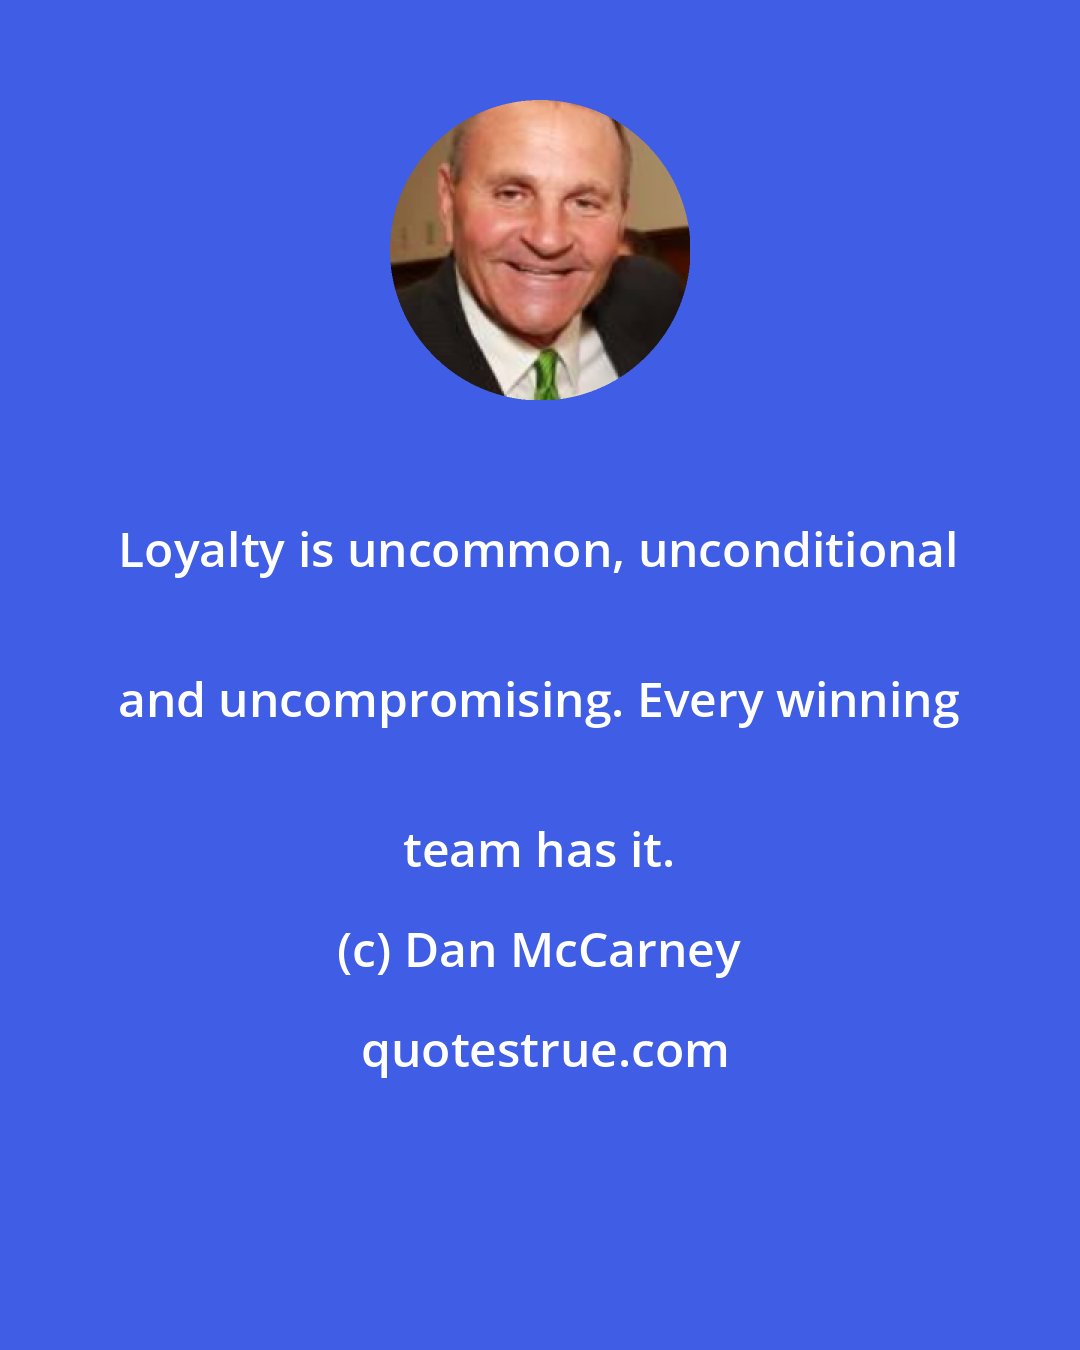 Dan McCarney: Loyalty is uncommon, unconditional 
 and uncompromising. Every winning 
 team has it.